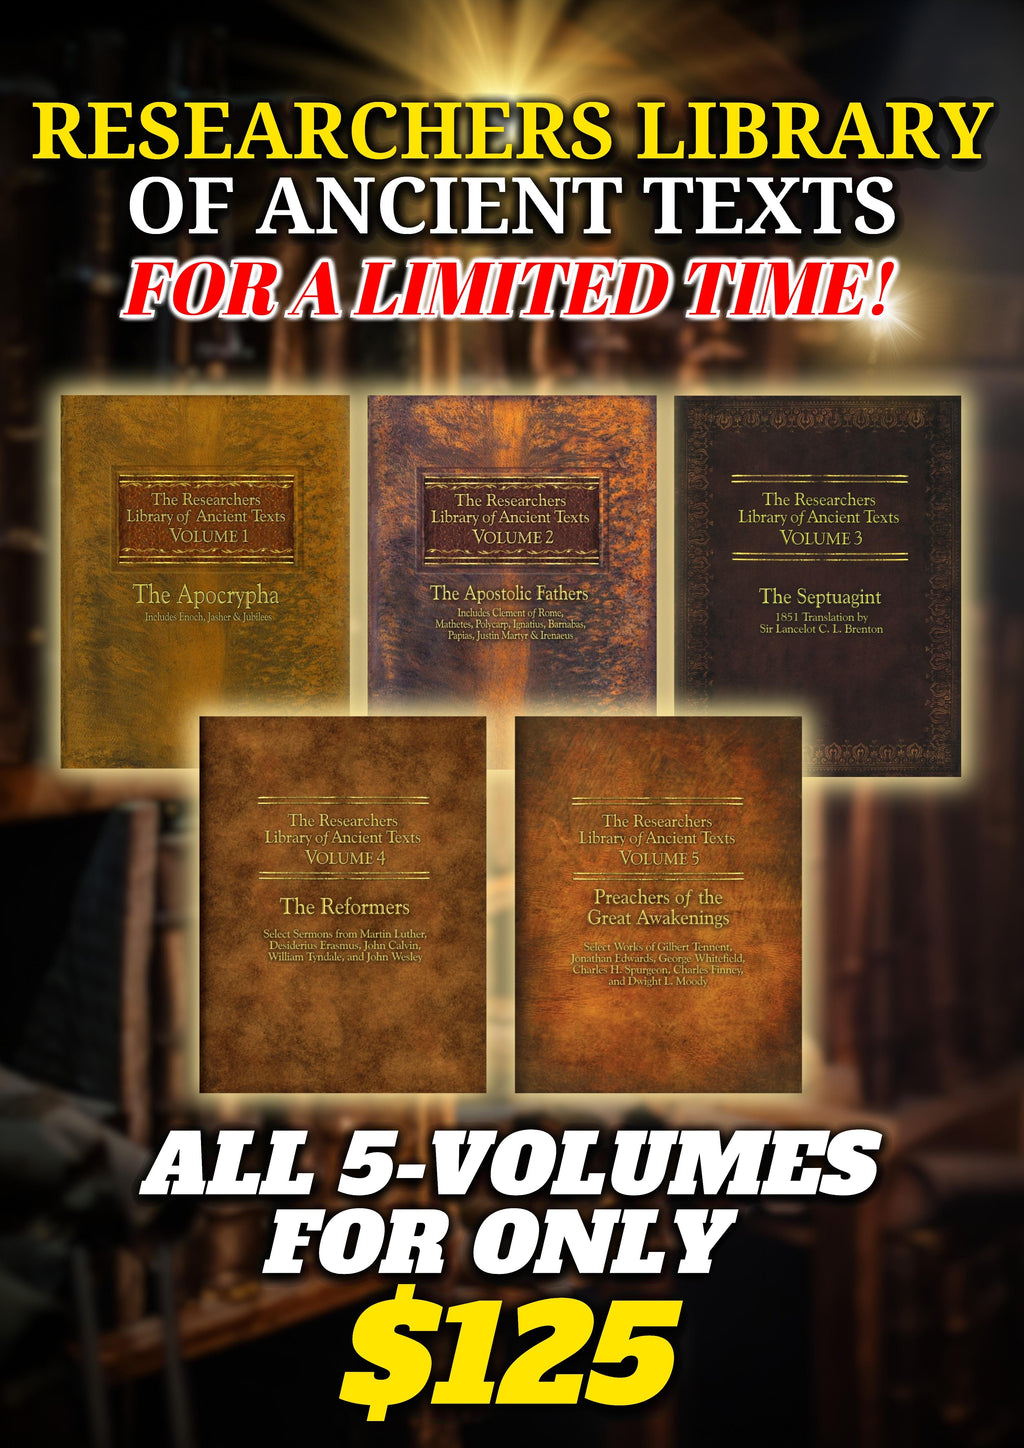 The Researchers Library of Ancient Texts 5 VOLUME SET!